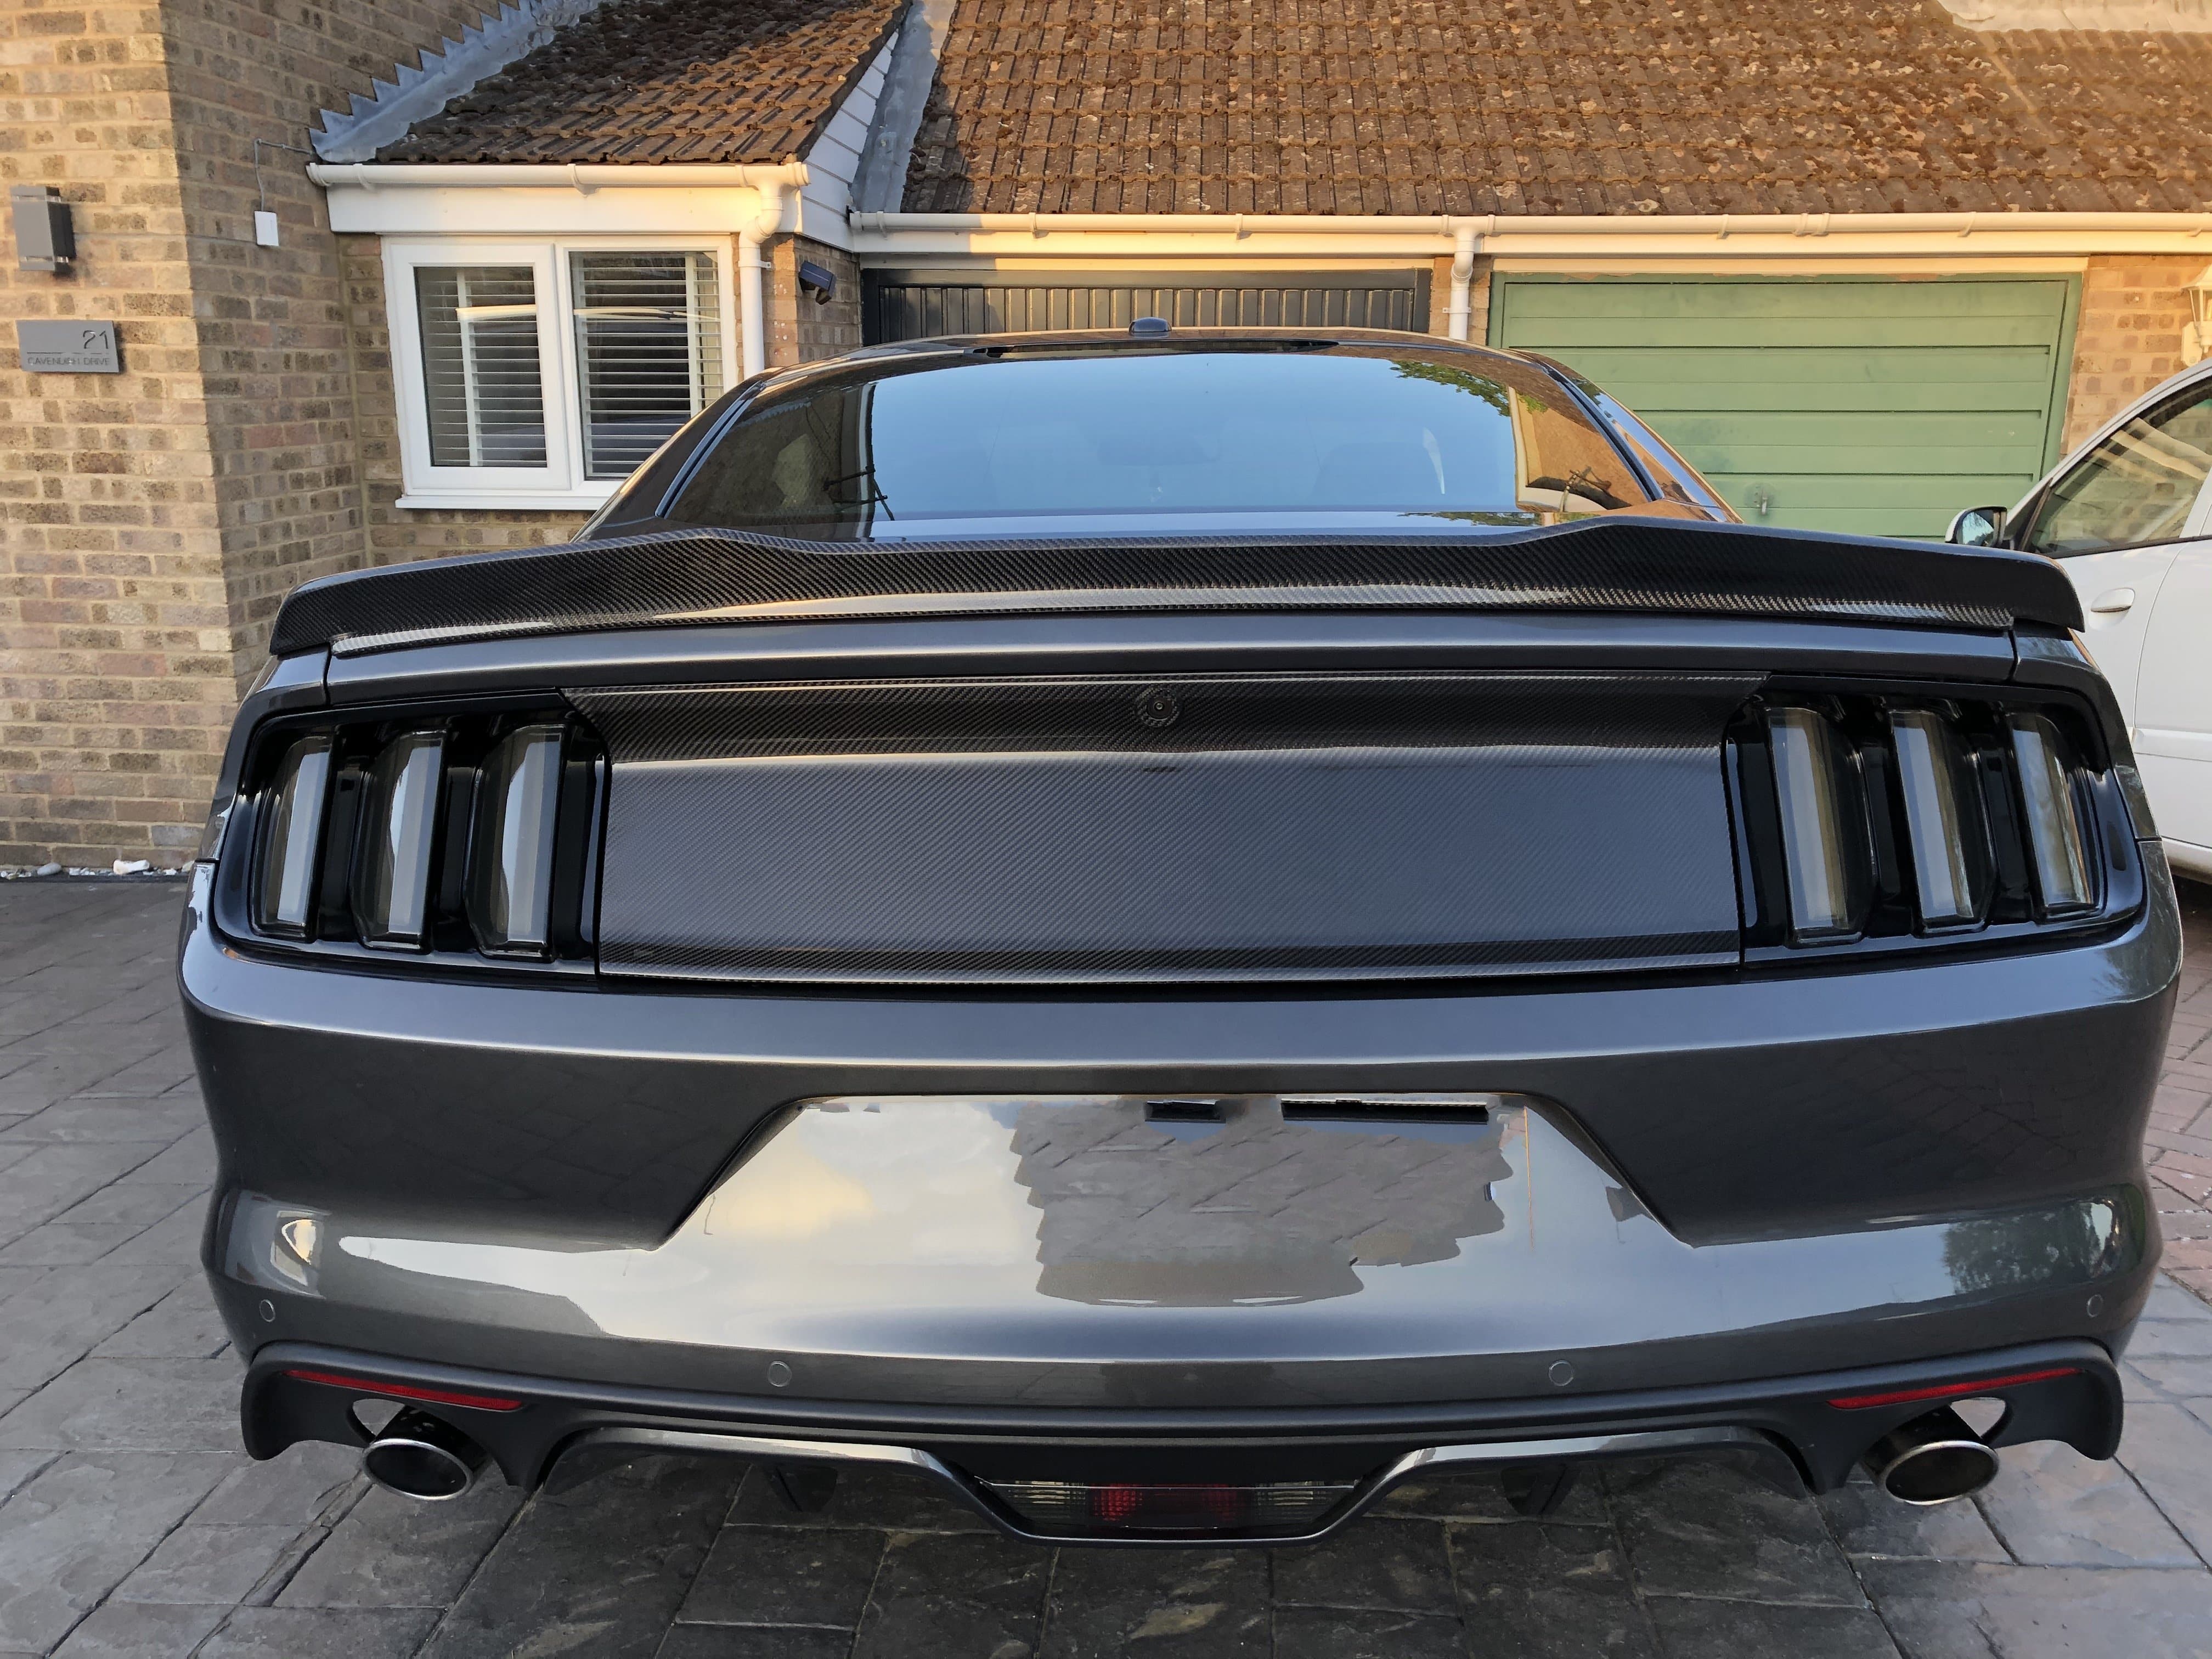 The Ford Mustang 6th Generation Pre Facelift (Pre 2018) Ducktail Style Carbon Fibre Rear Spoiler - Manufactured from 2*2 Carbon Fibre Weave and handcrafted by our expert carbon fibre manufacturers this product adds even more aggression to the already stunning Mustang with its tapered centre section providing added downforce to the rear for cornering.